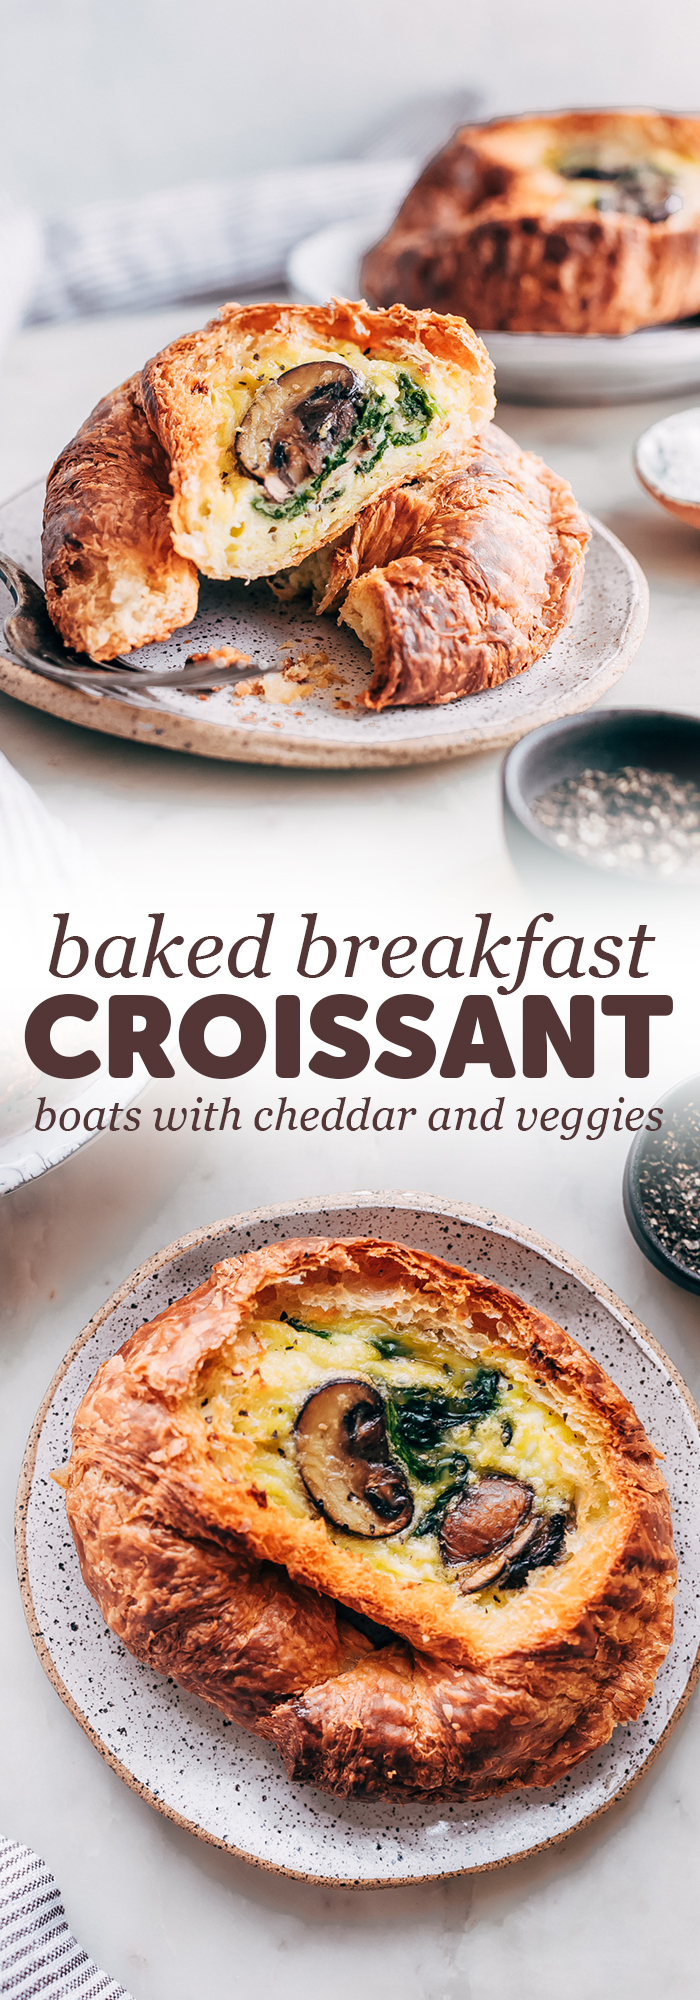 Easy Breakfast Croissant Boats - Learn how to make easy breakfast croissant boats and customize them for your taste! These croissant boats are the perfect grab and go option for busy mornings! You can make and freeze them, then just reheat in a toaster oven! #croissantboats #breakfastideas #backtoschool #breakfastcasserole | Littlespicejar.com